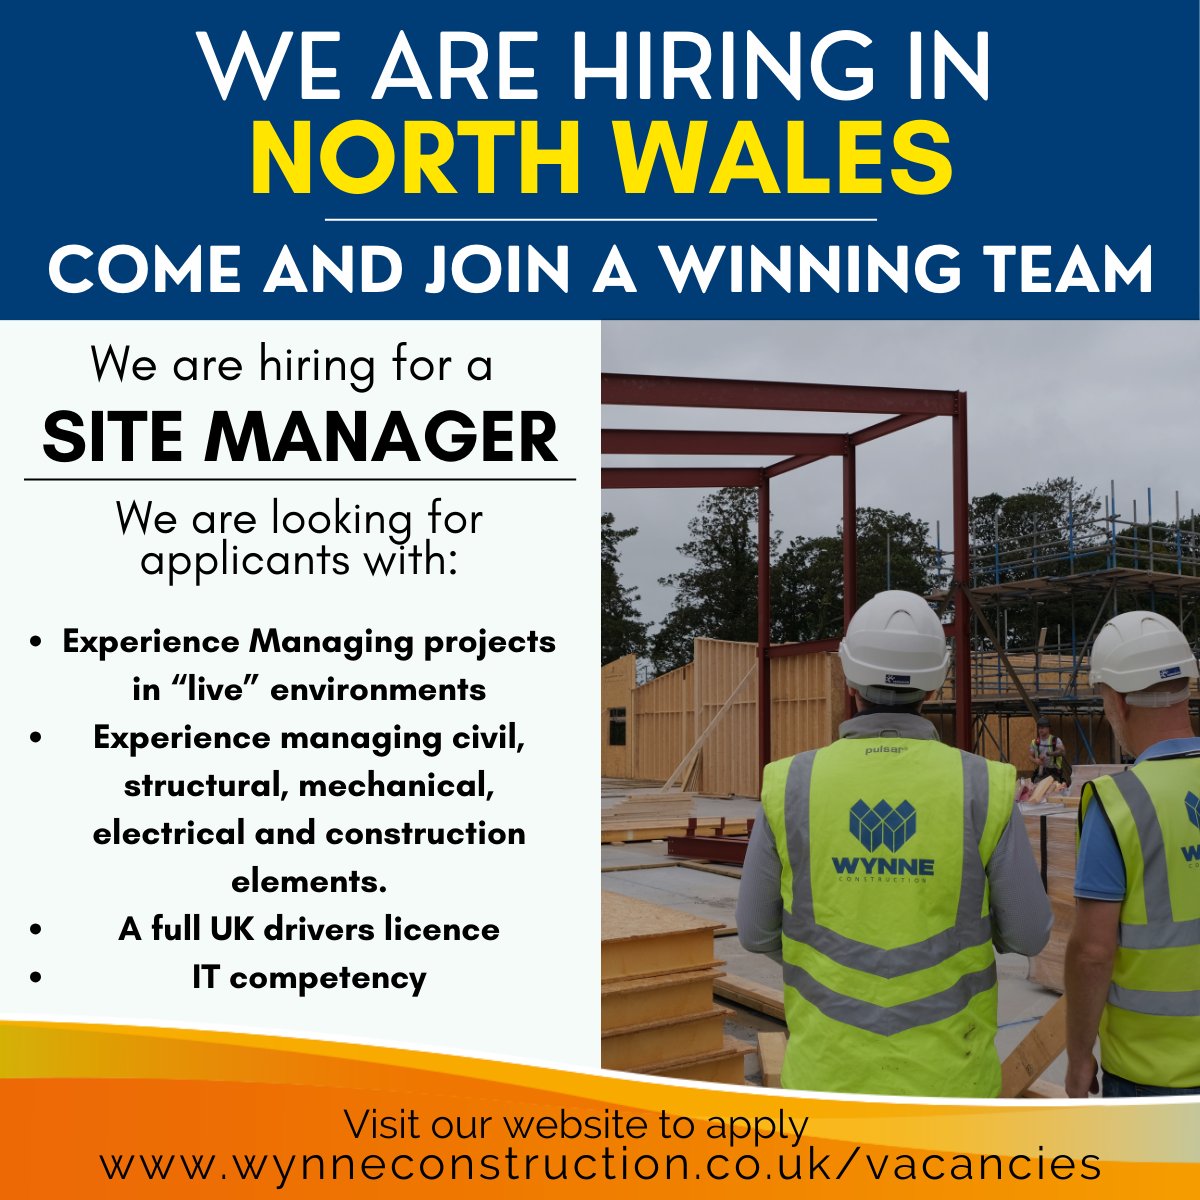 An exciting opportunity in North Wales to join Wynne Construction We are looking for Site Managers to join our team in North Wales To apply, visit our website: wynneconstruction.co.uk/vacancies/ Please share, repost and tag to any interested or recommended contacts #NorthWalesJobs